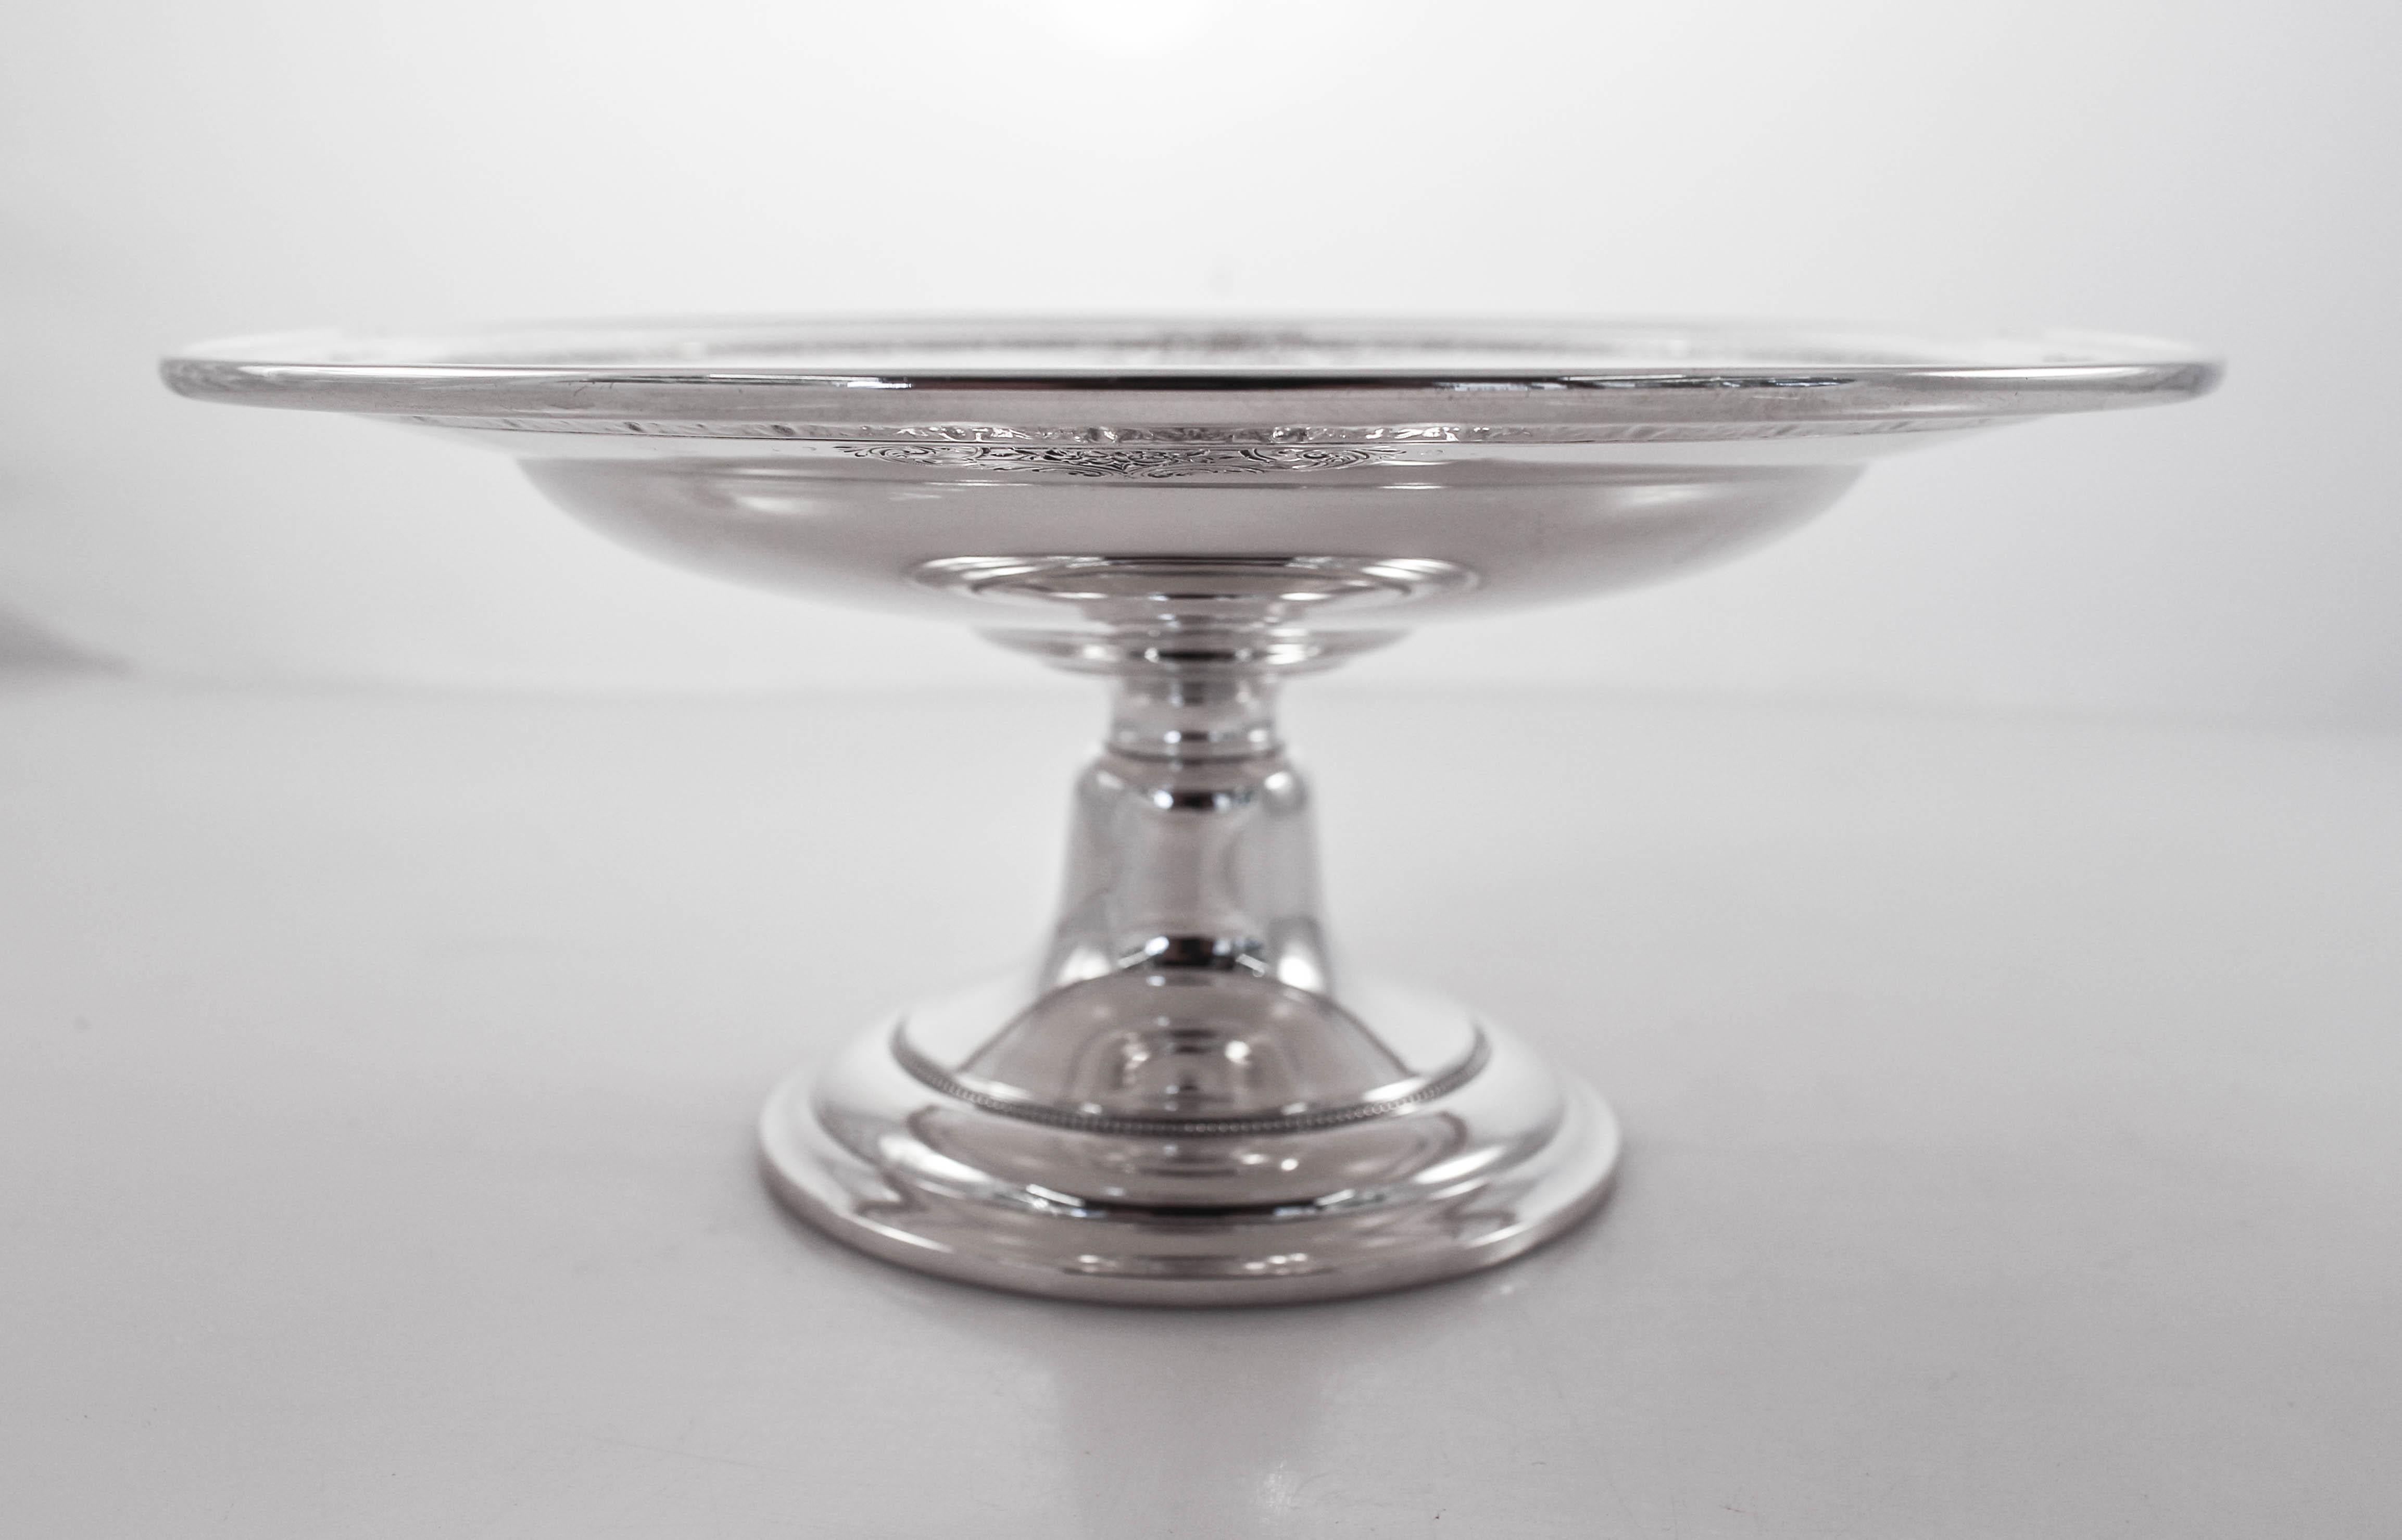 Offered here is a sterling silver tazza in the Lady Constance pattern by Towle Silversmith. AN elegant etched motif decorates the border. The base is not weighted. A good size for pastries and/or dried fruit.